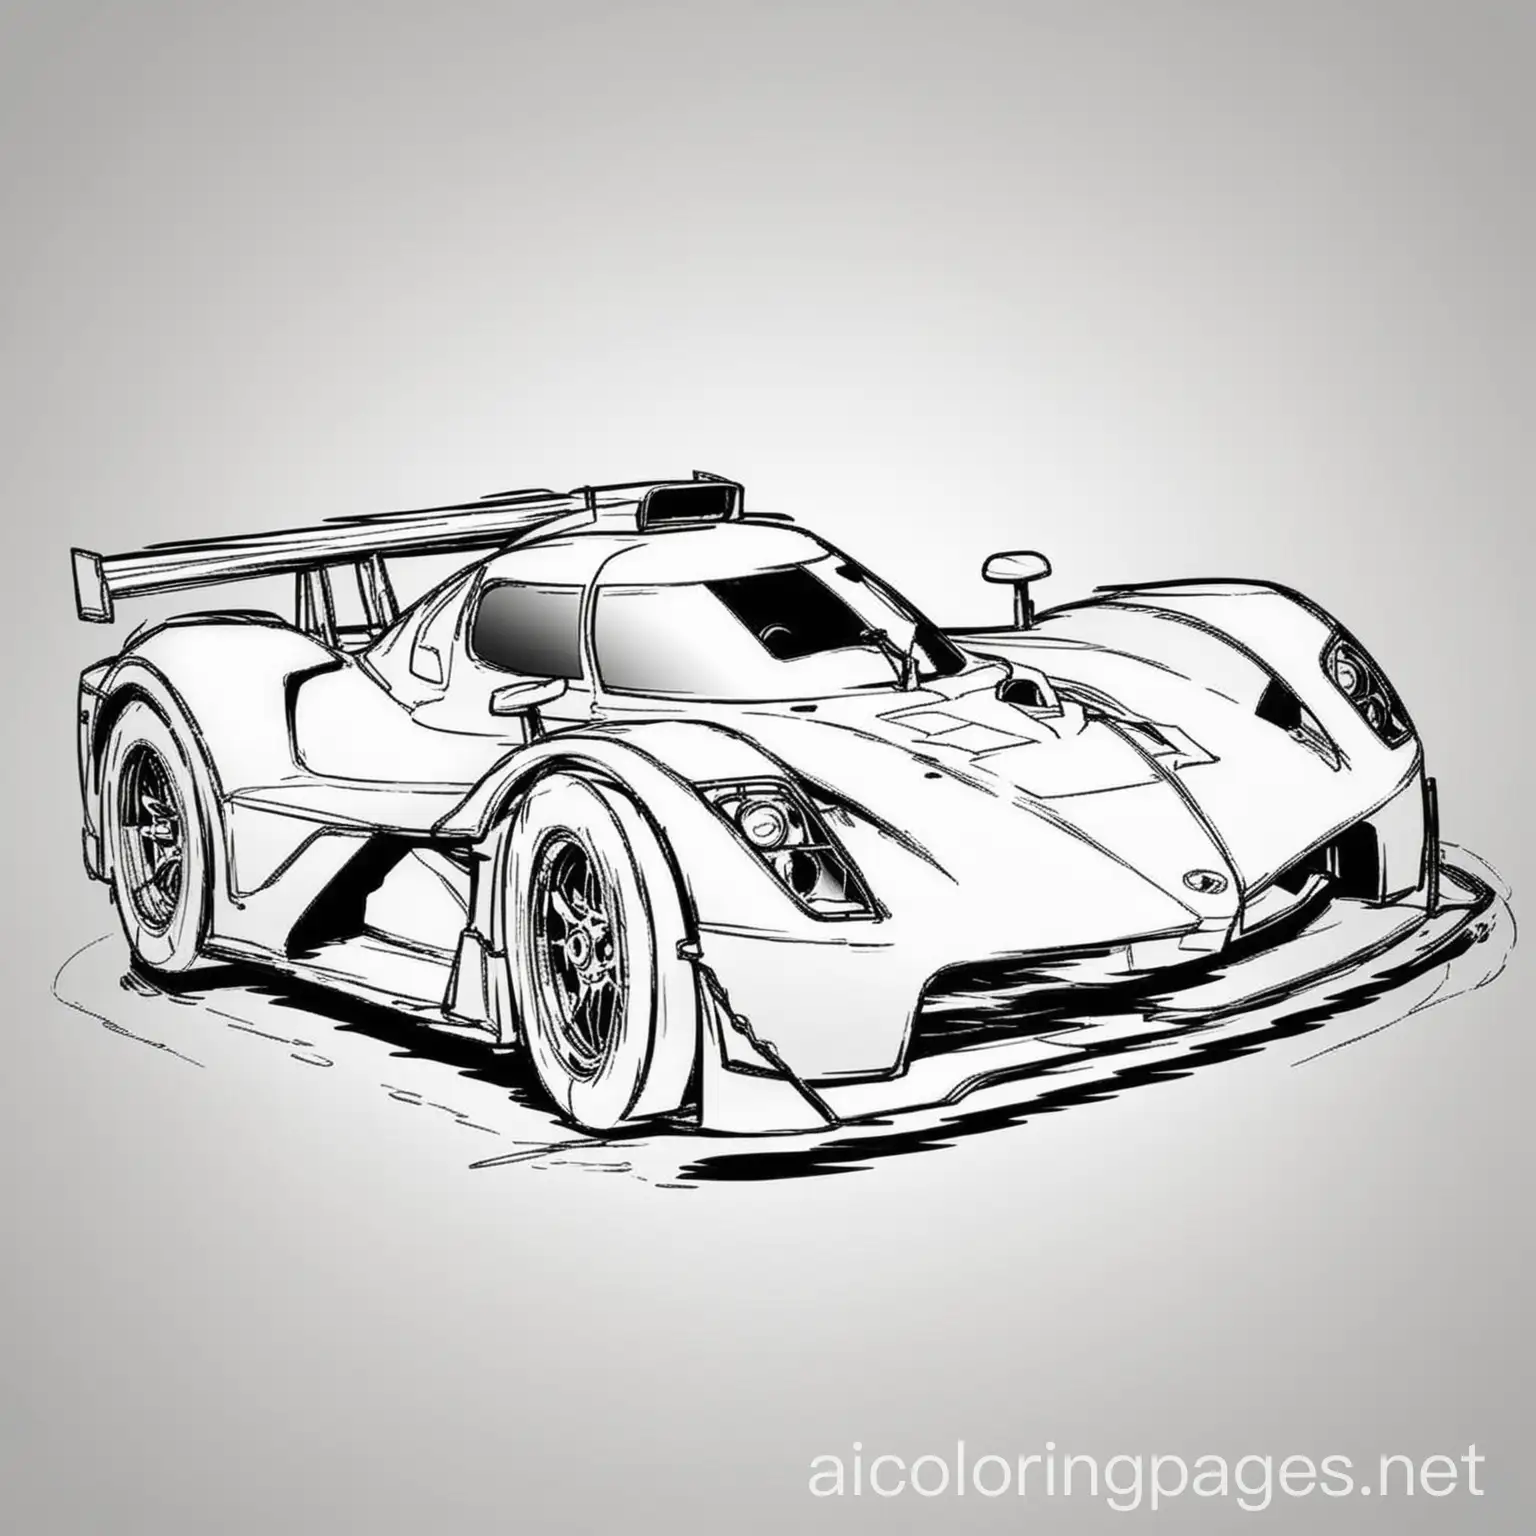 Fast-Racing-Car-Coloring-Page-Black-and-White-Line-Art-for-Kids